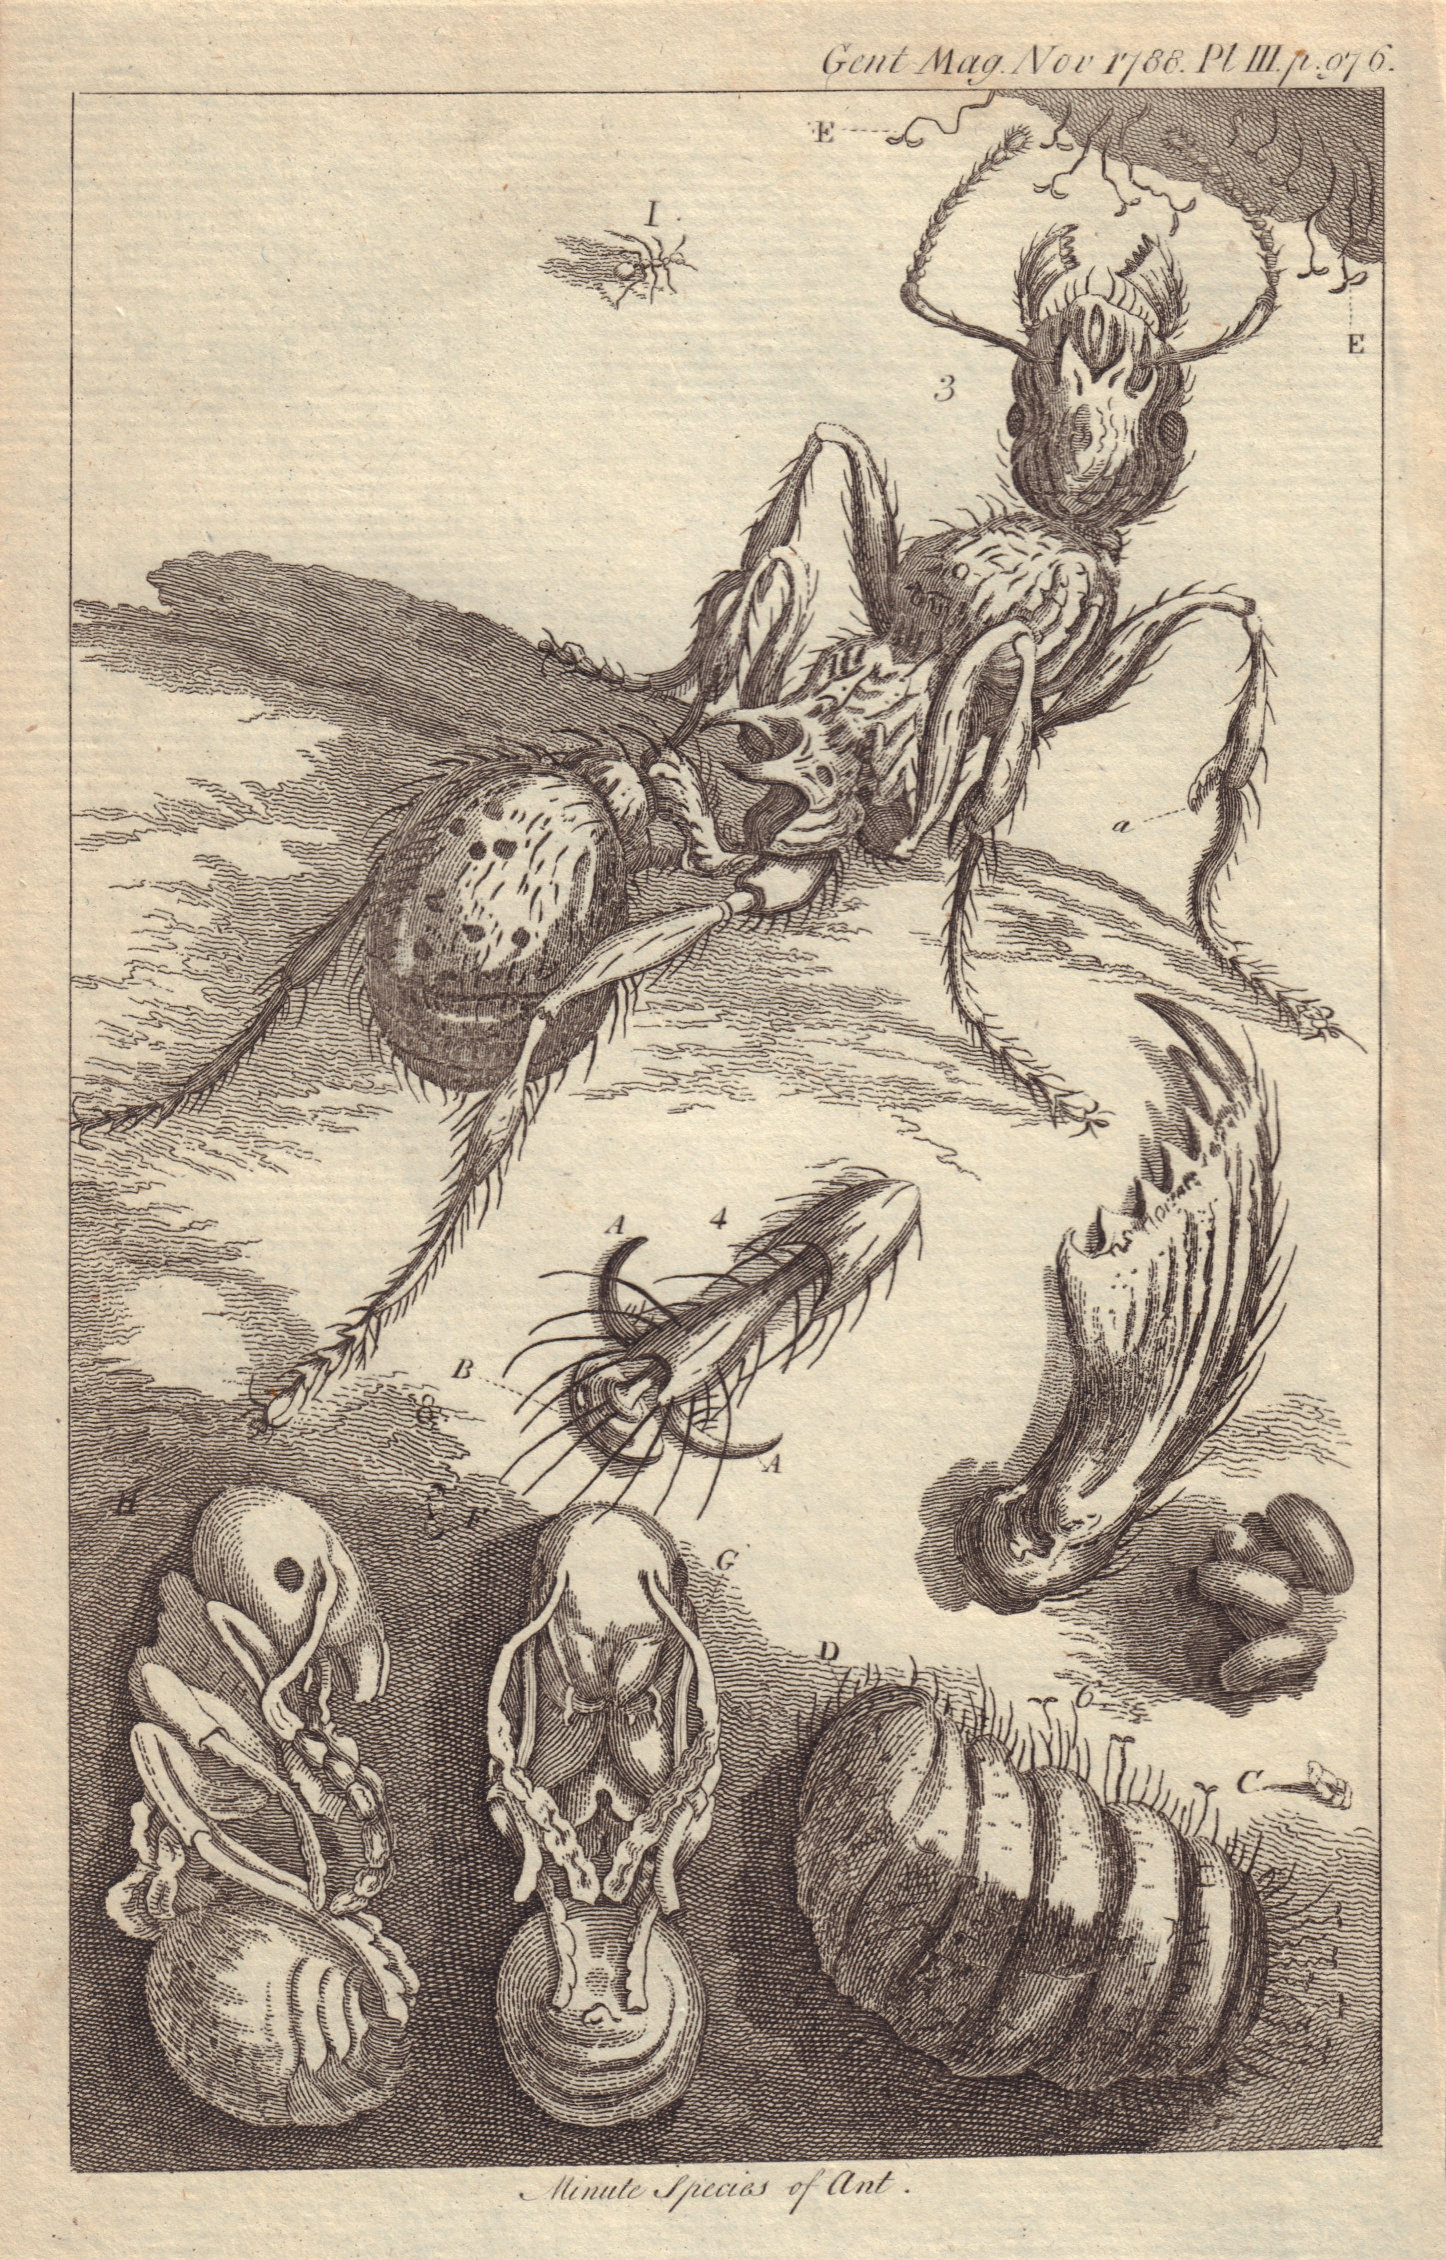 Minute Species of Ant in its larva, pupa, and imago state. GENTS MAG 1788